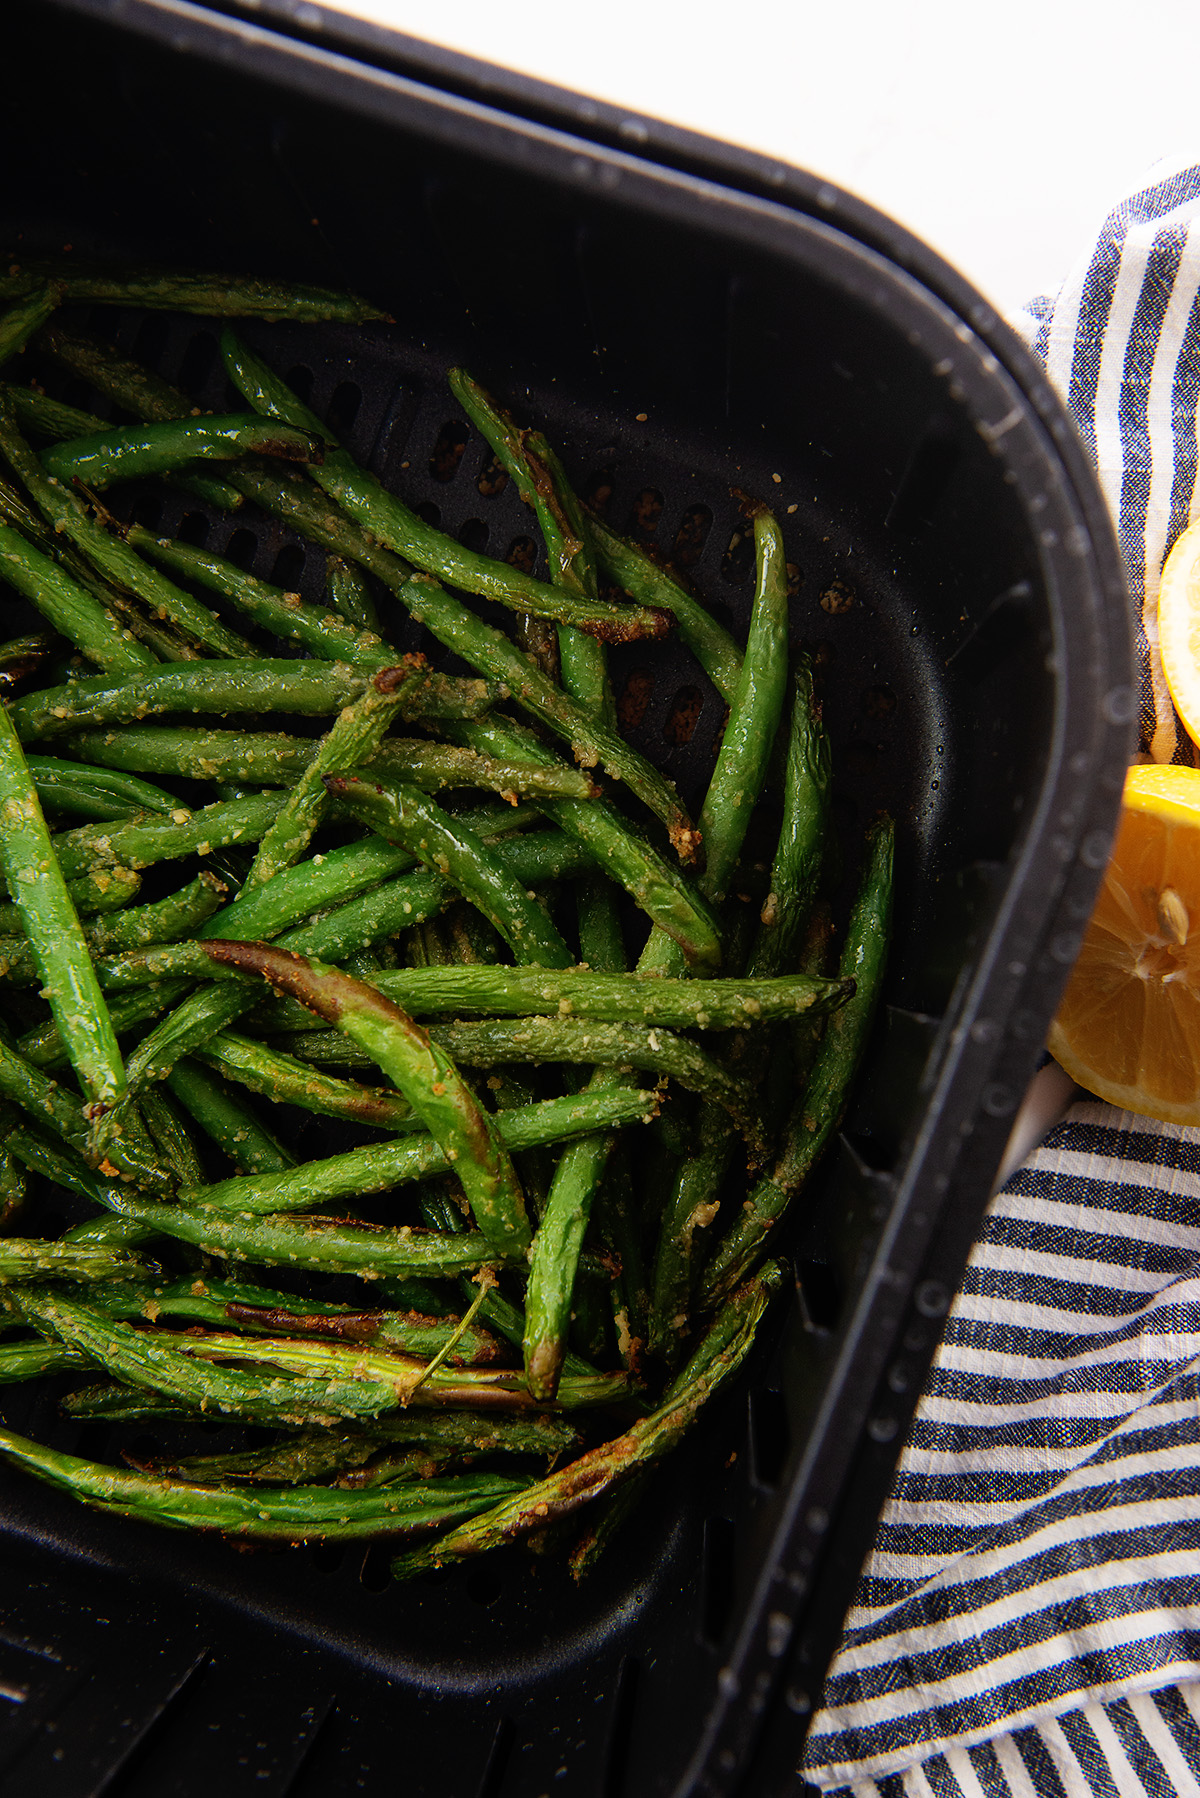 Overhead view of cooked green beans in an air fryer basket